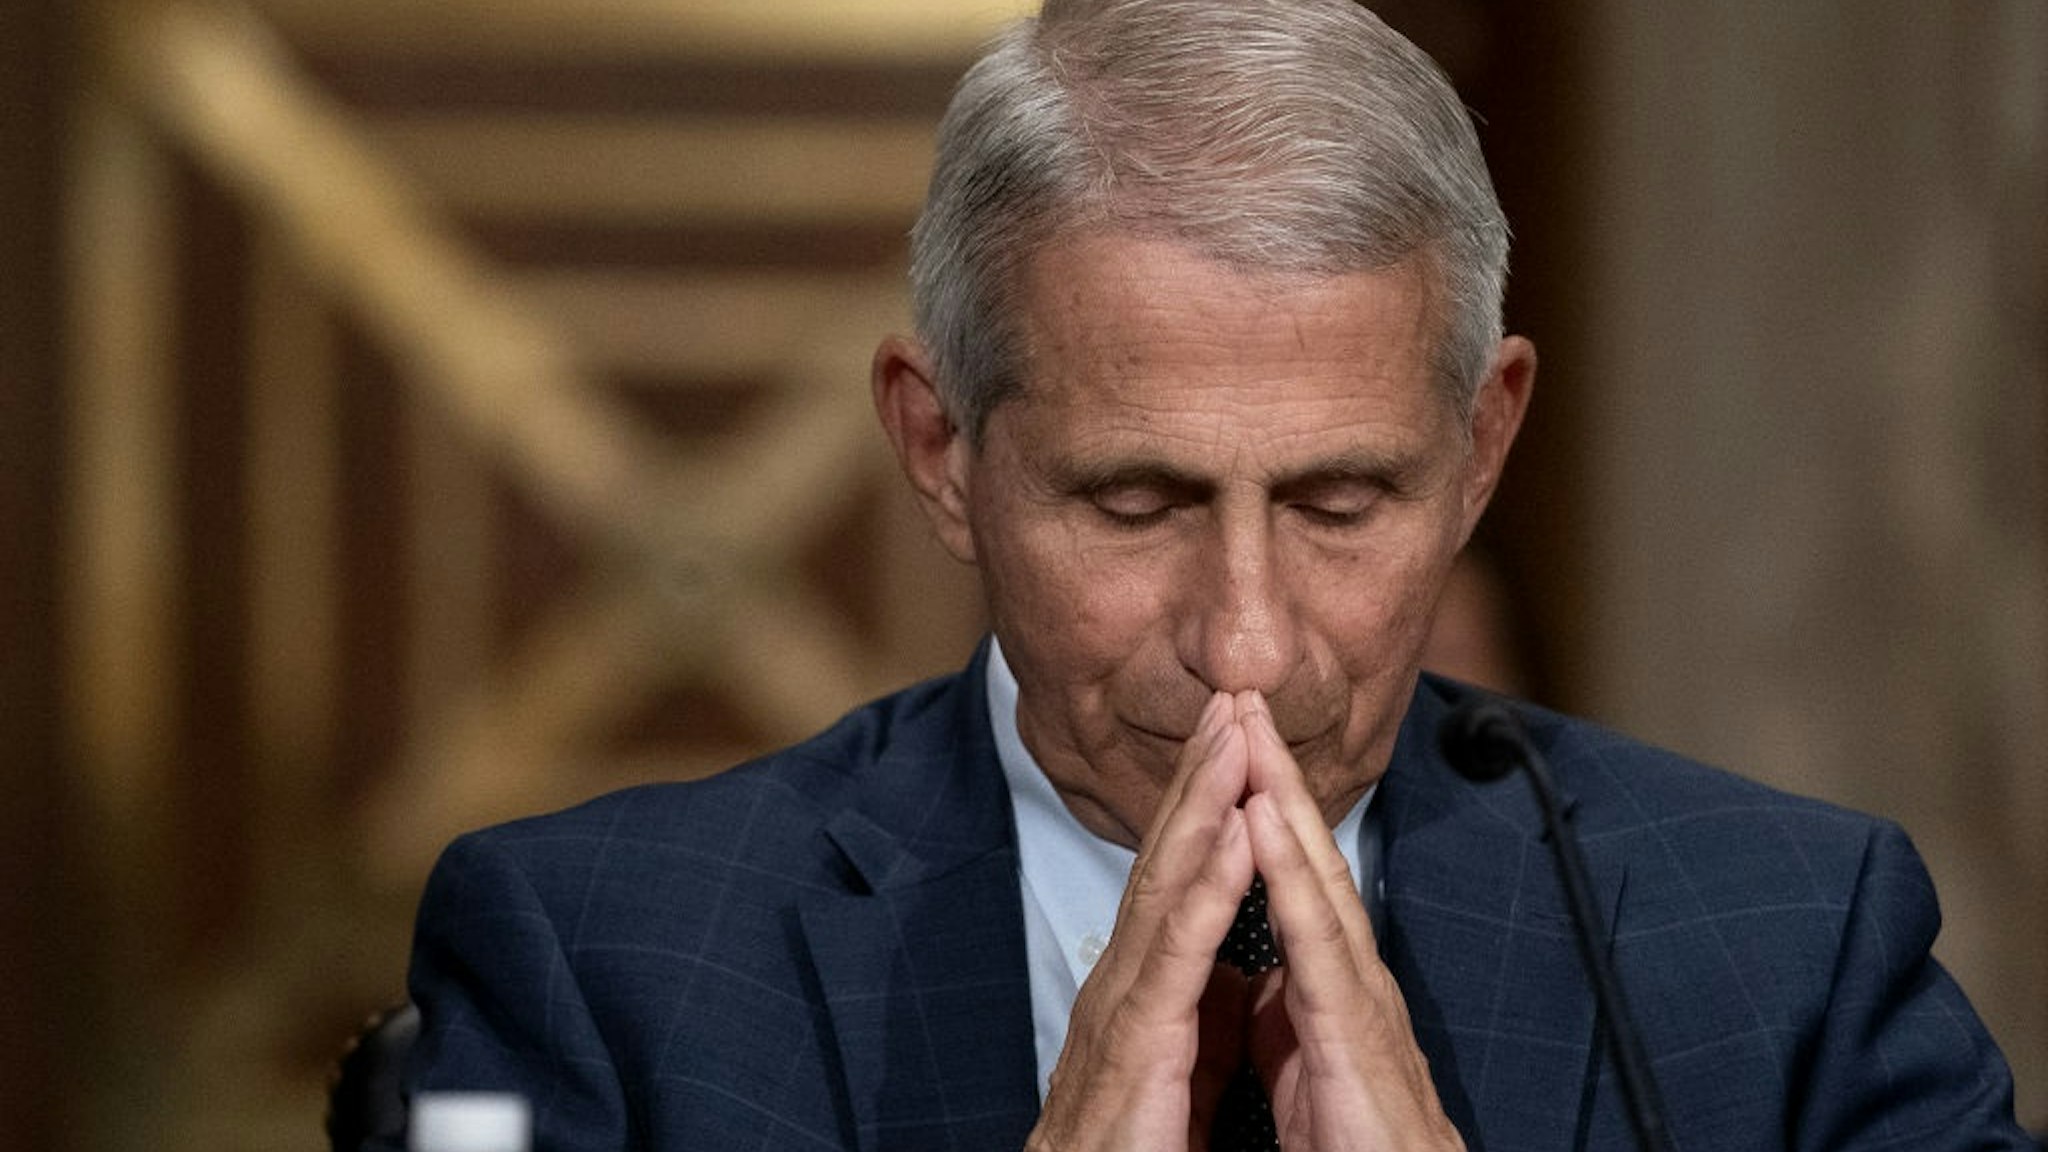 Anthony Fauci, director of the National Institute of Allergy and Infectious Diseases, listens during a Senate Health, Education, Labor, and Pensions Committee confirmation hearing in Washington, D.C., U.S., on Tuesday, July 20, 2021.